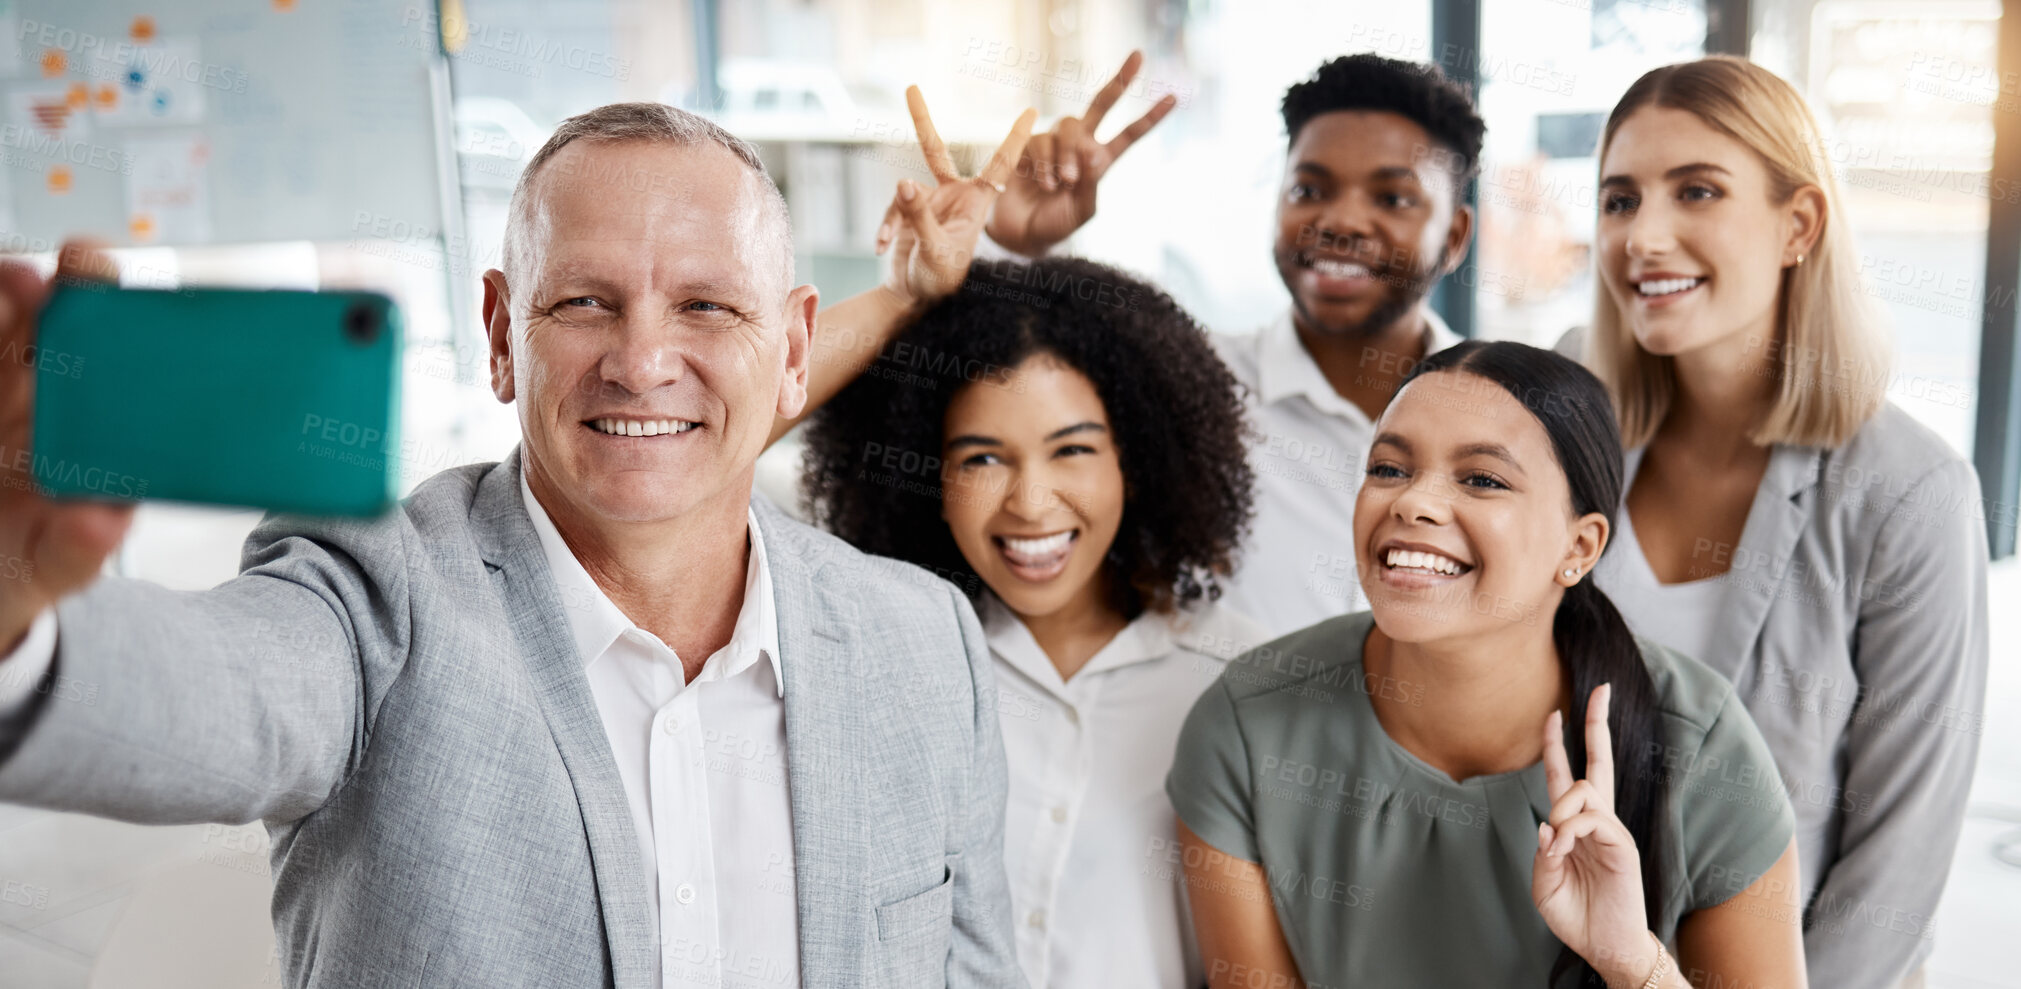 Buy stock photo Happy, corporate people take selfie, team building. Diverse group, business men and women, smartphone photography. Creative, friendly and fun activity, unity and respect in business workplace.
